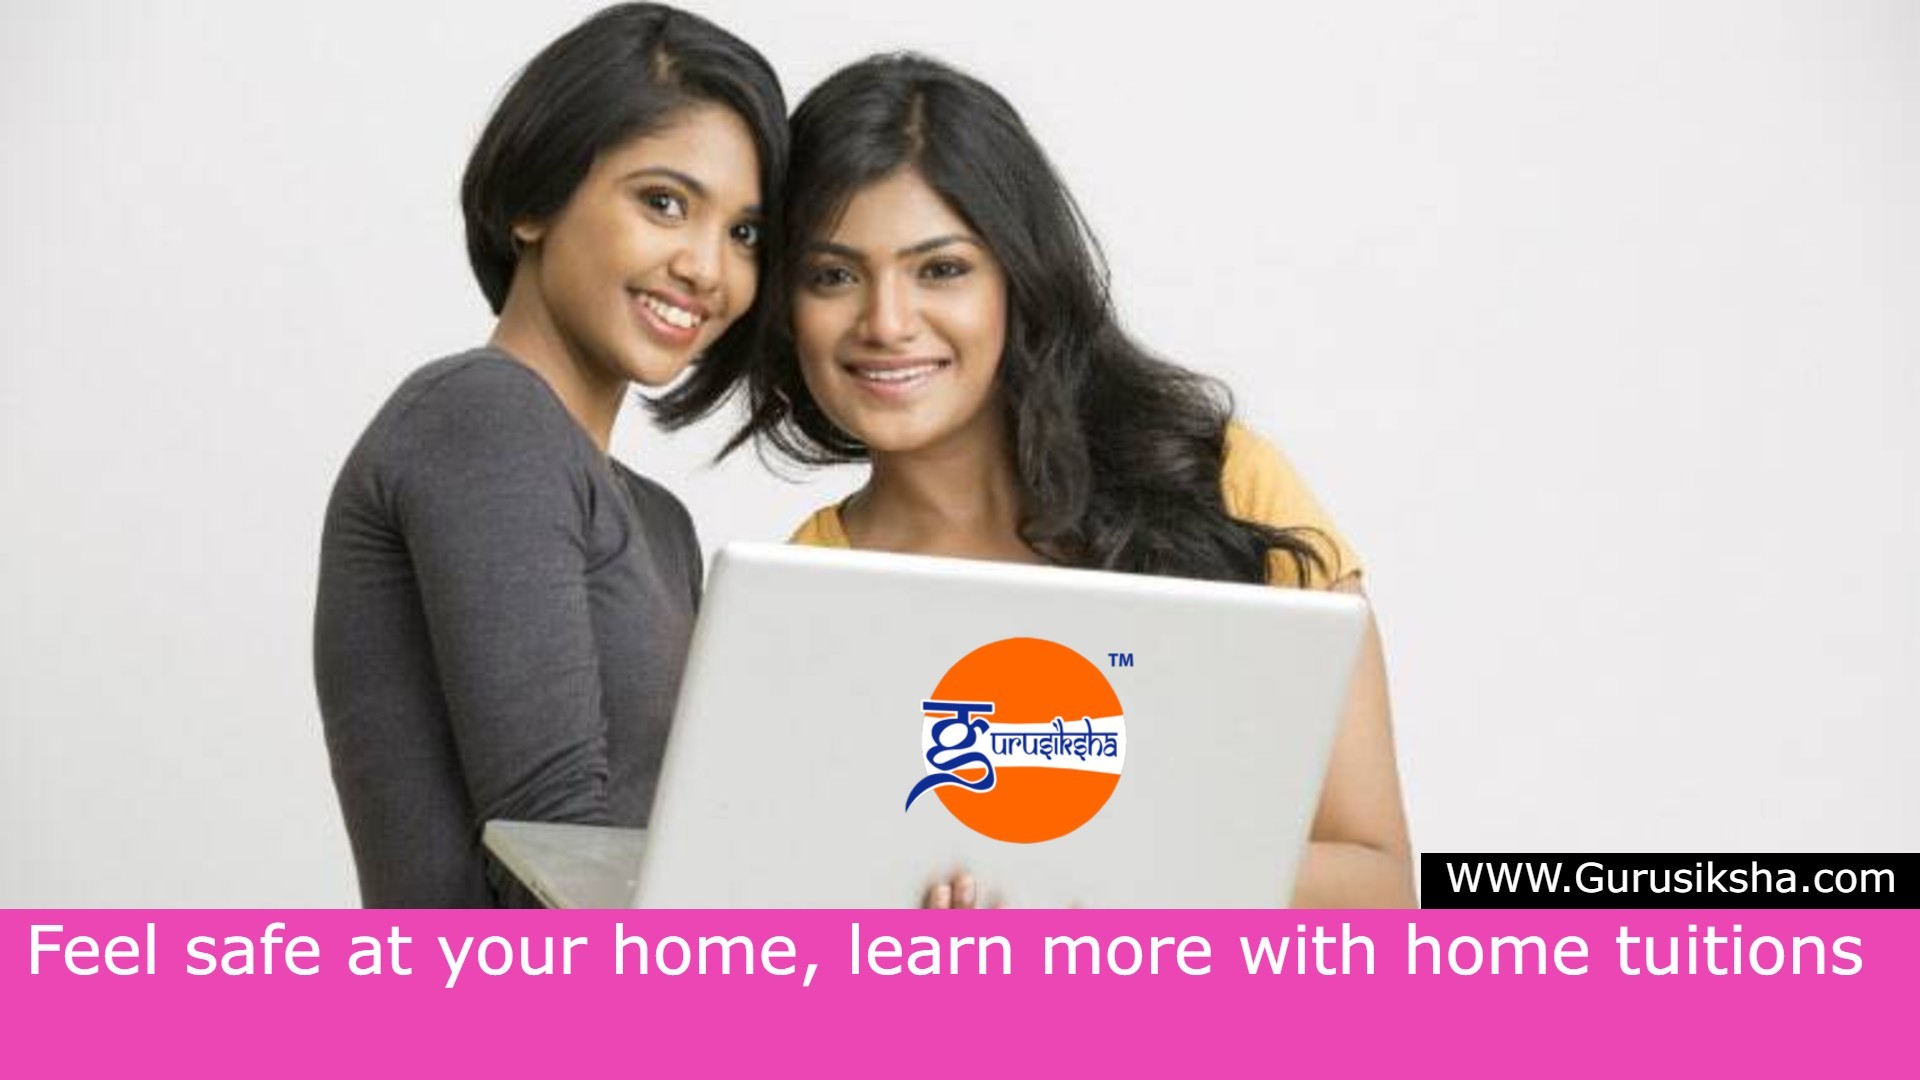 Feel safe at your home, learn more with home tuitions